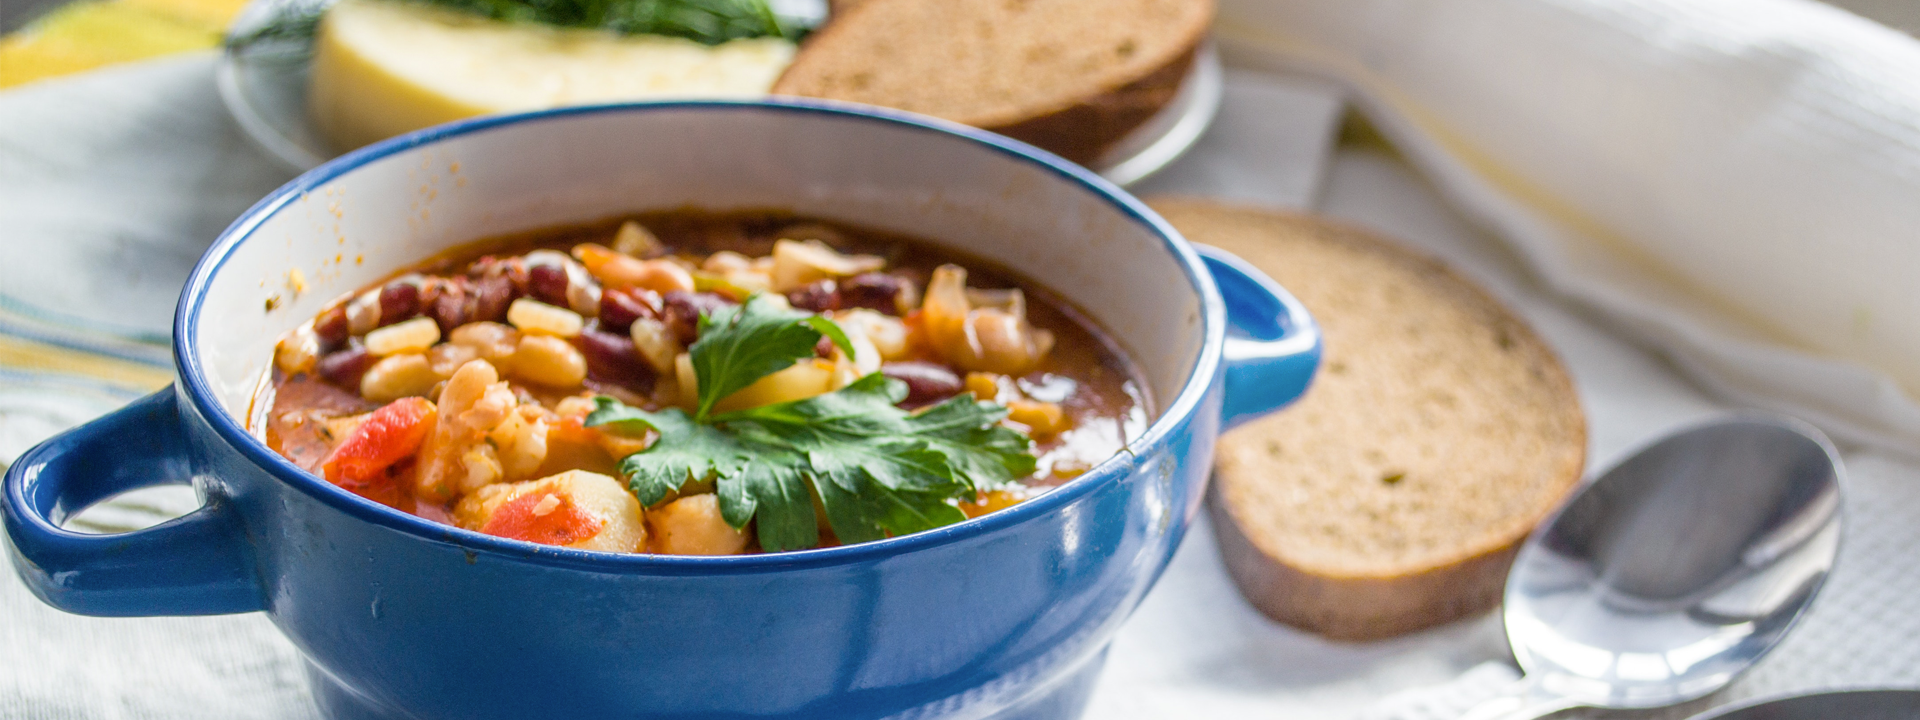 Recipe: Moroccan Carrot and Lentil Soup